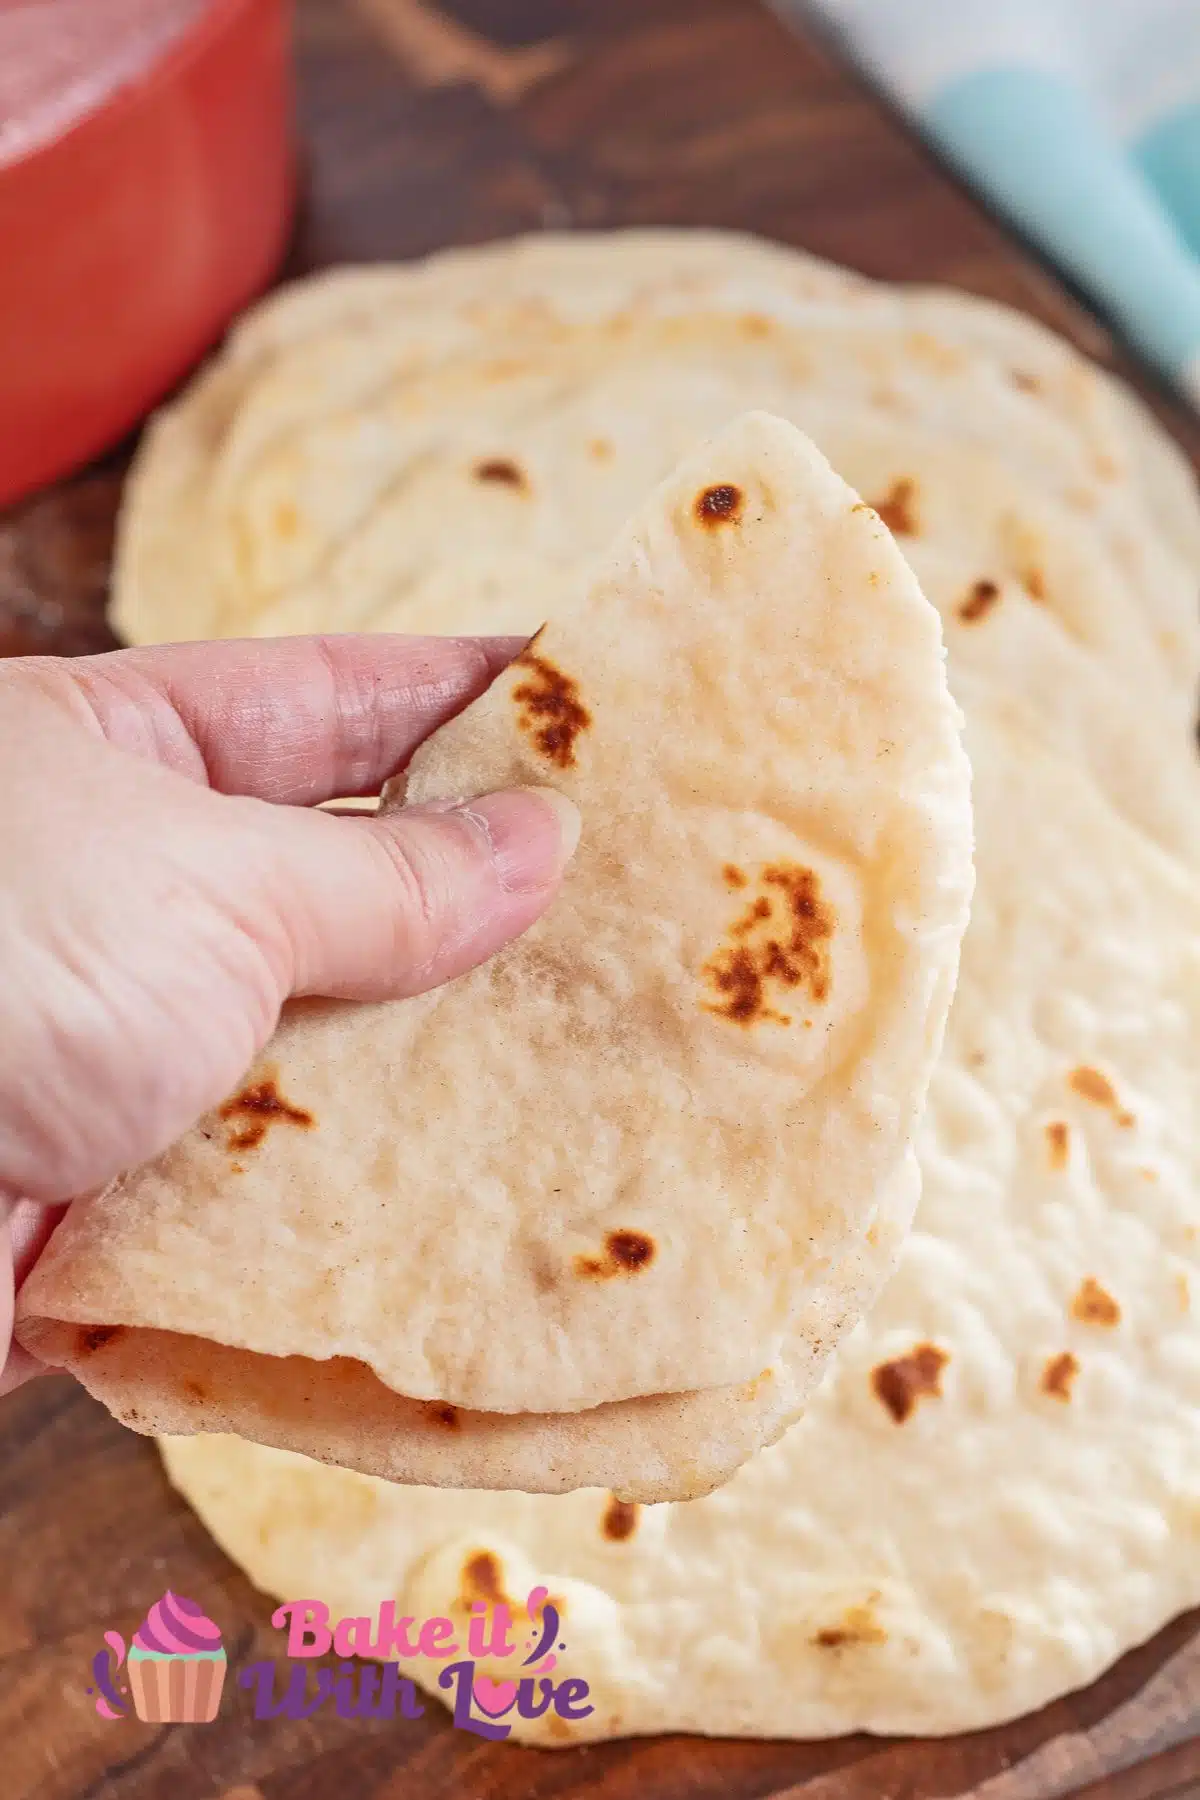 Homemade flour tortillas recipe after rolling and frying to cook with one folded in a hand.